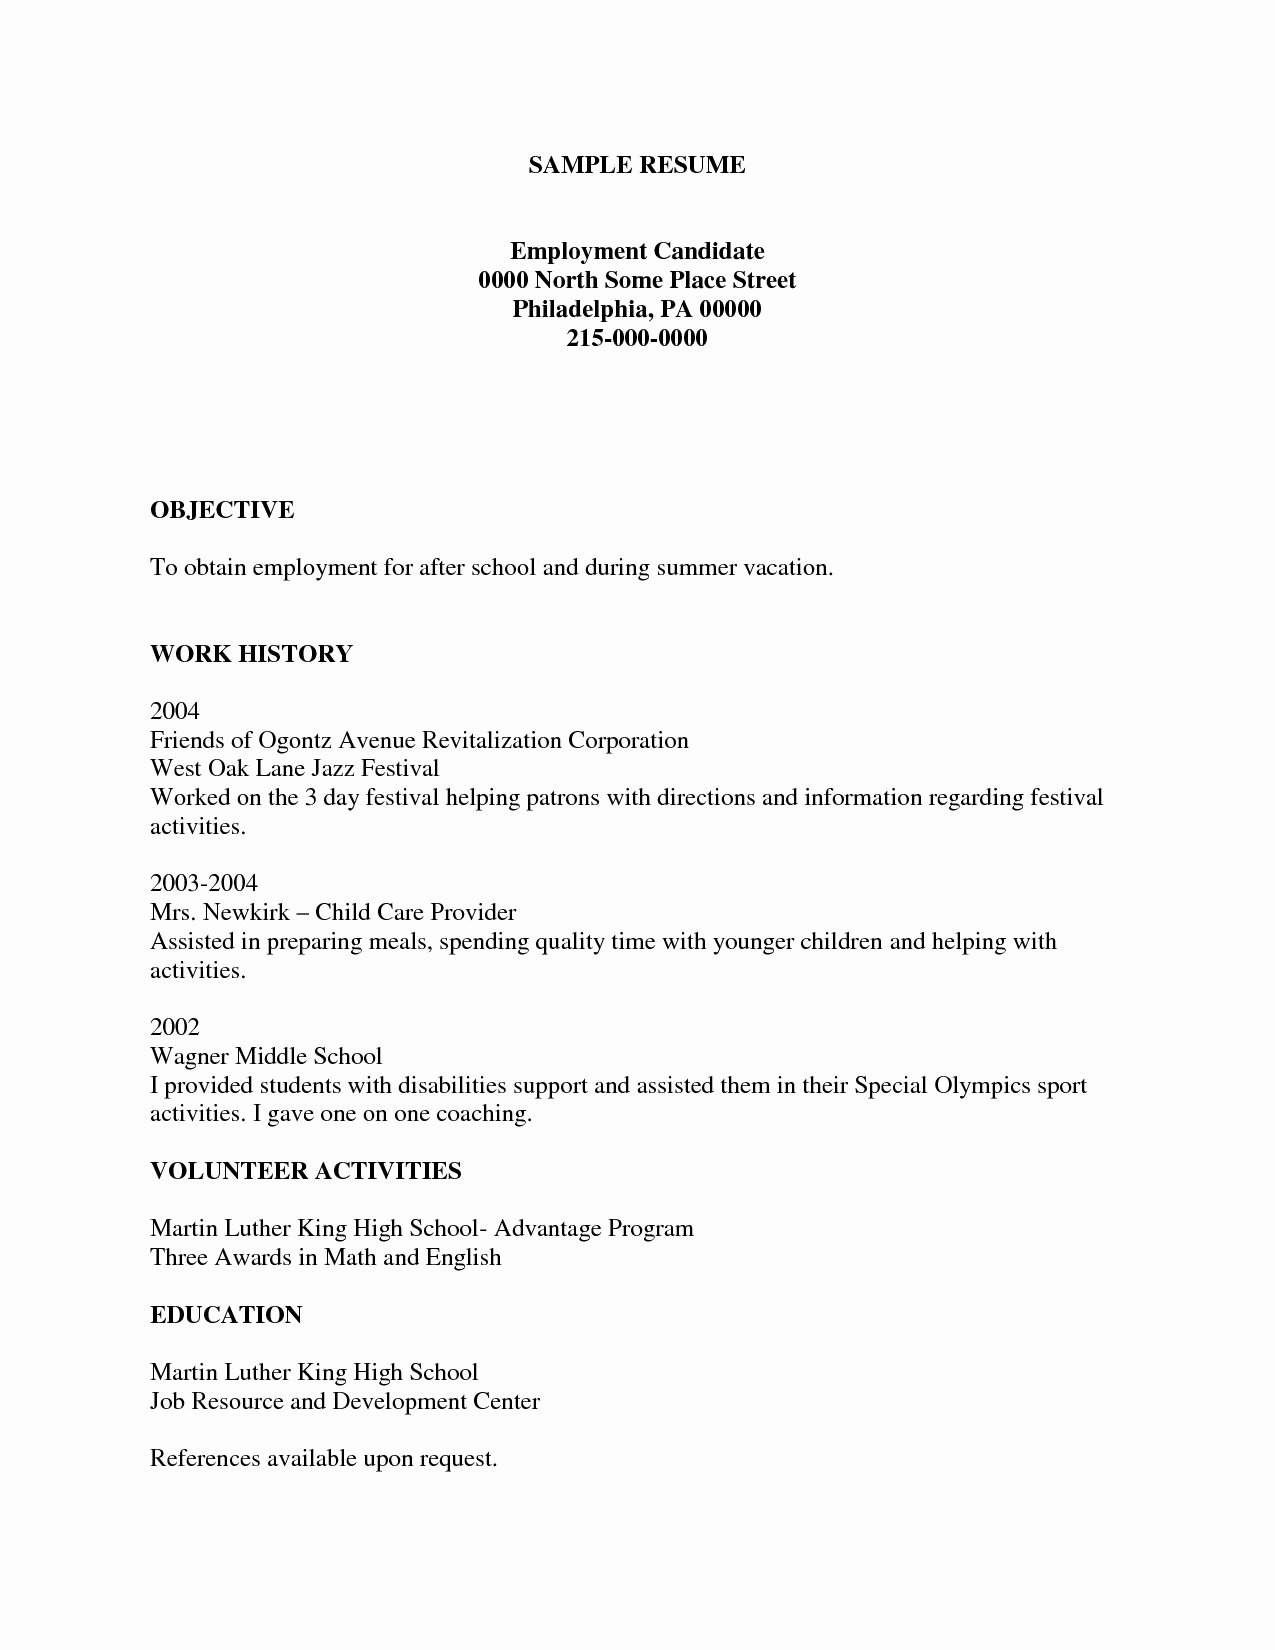 Resume Template for Kids